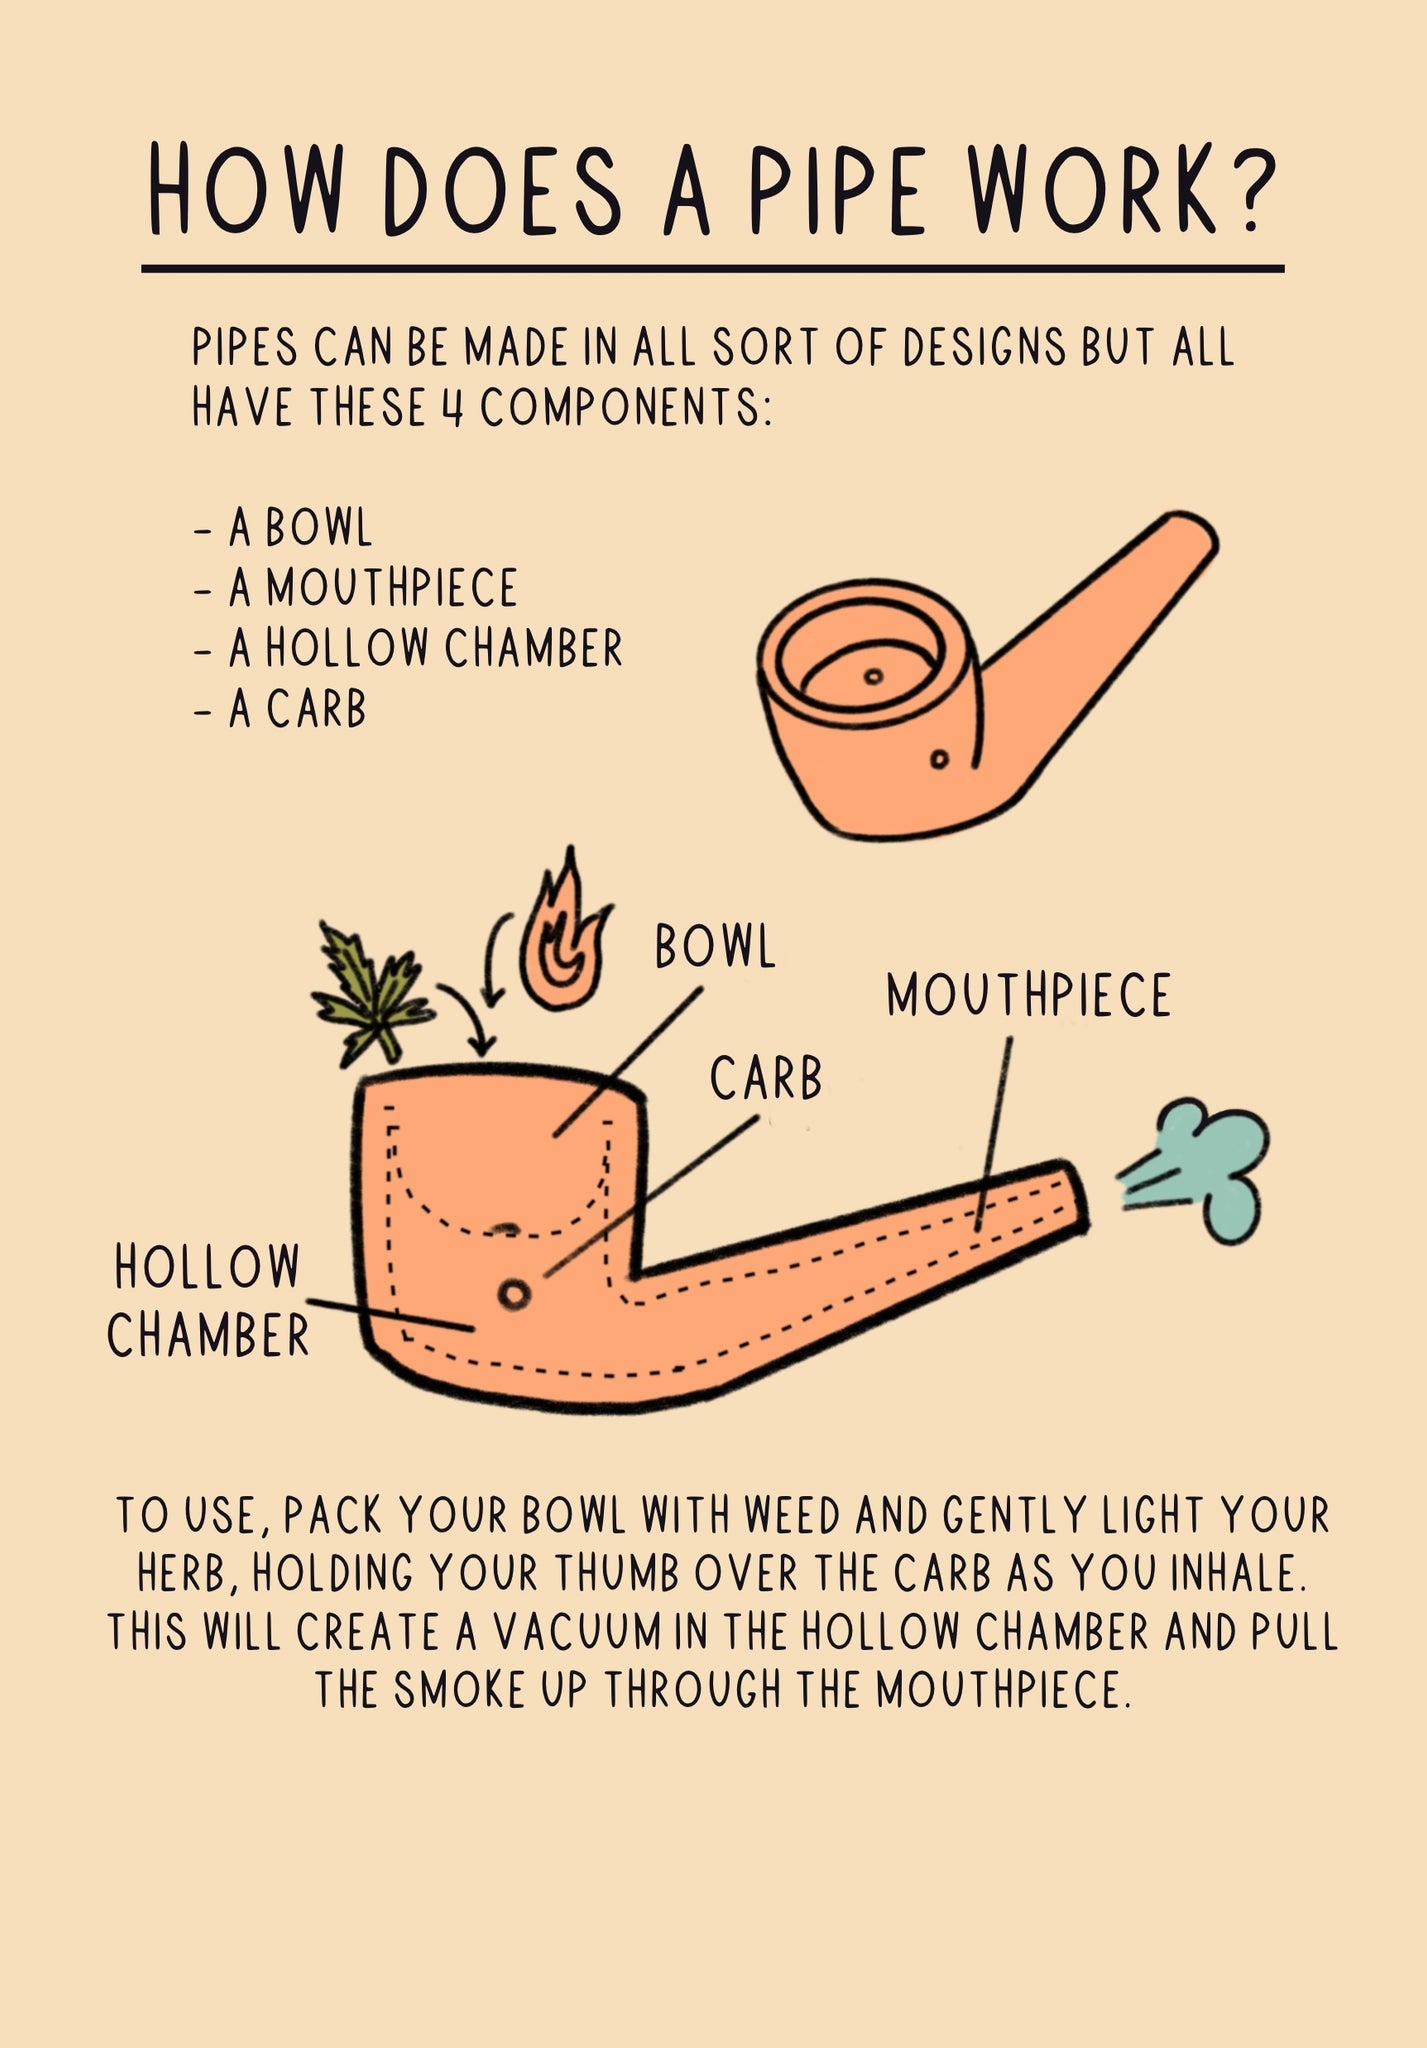 Let's Make A Pipe! by Sarah Duyer